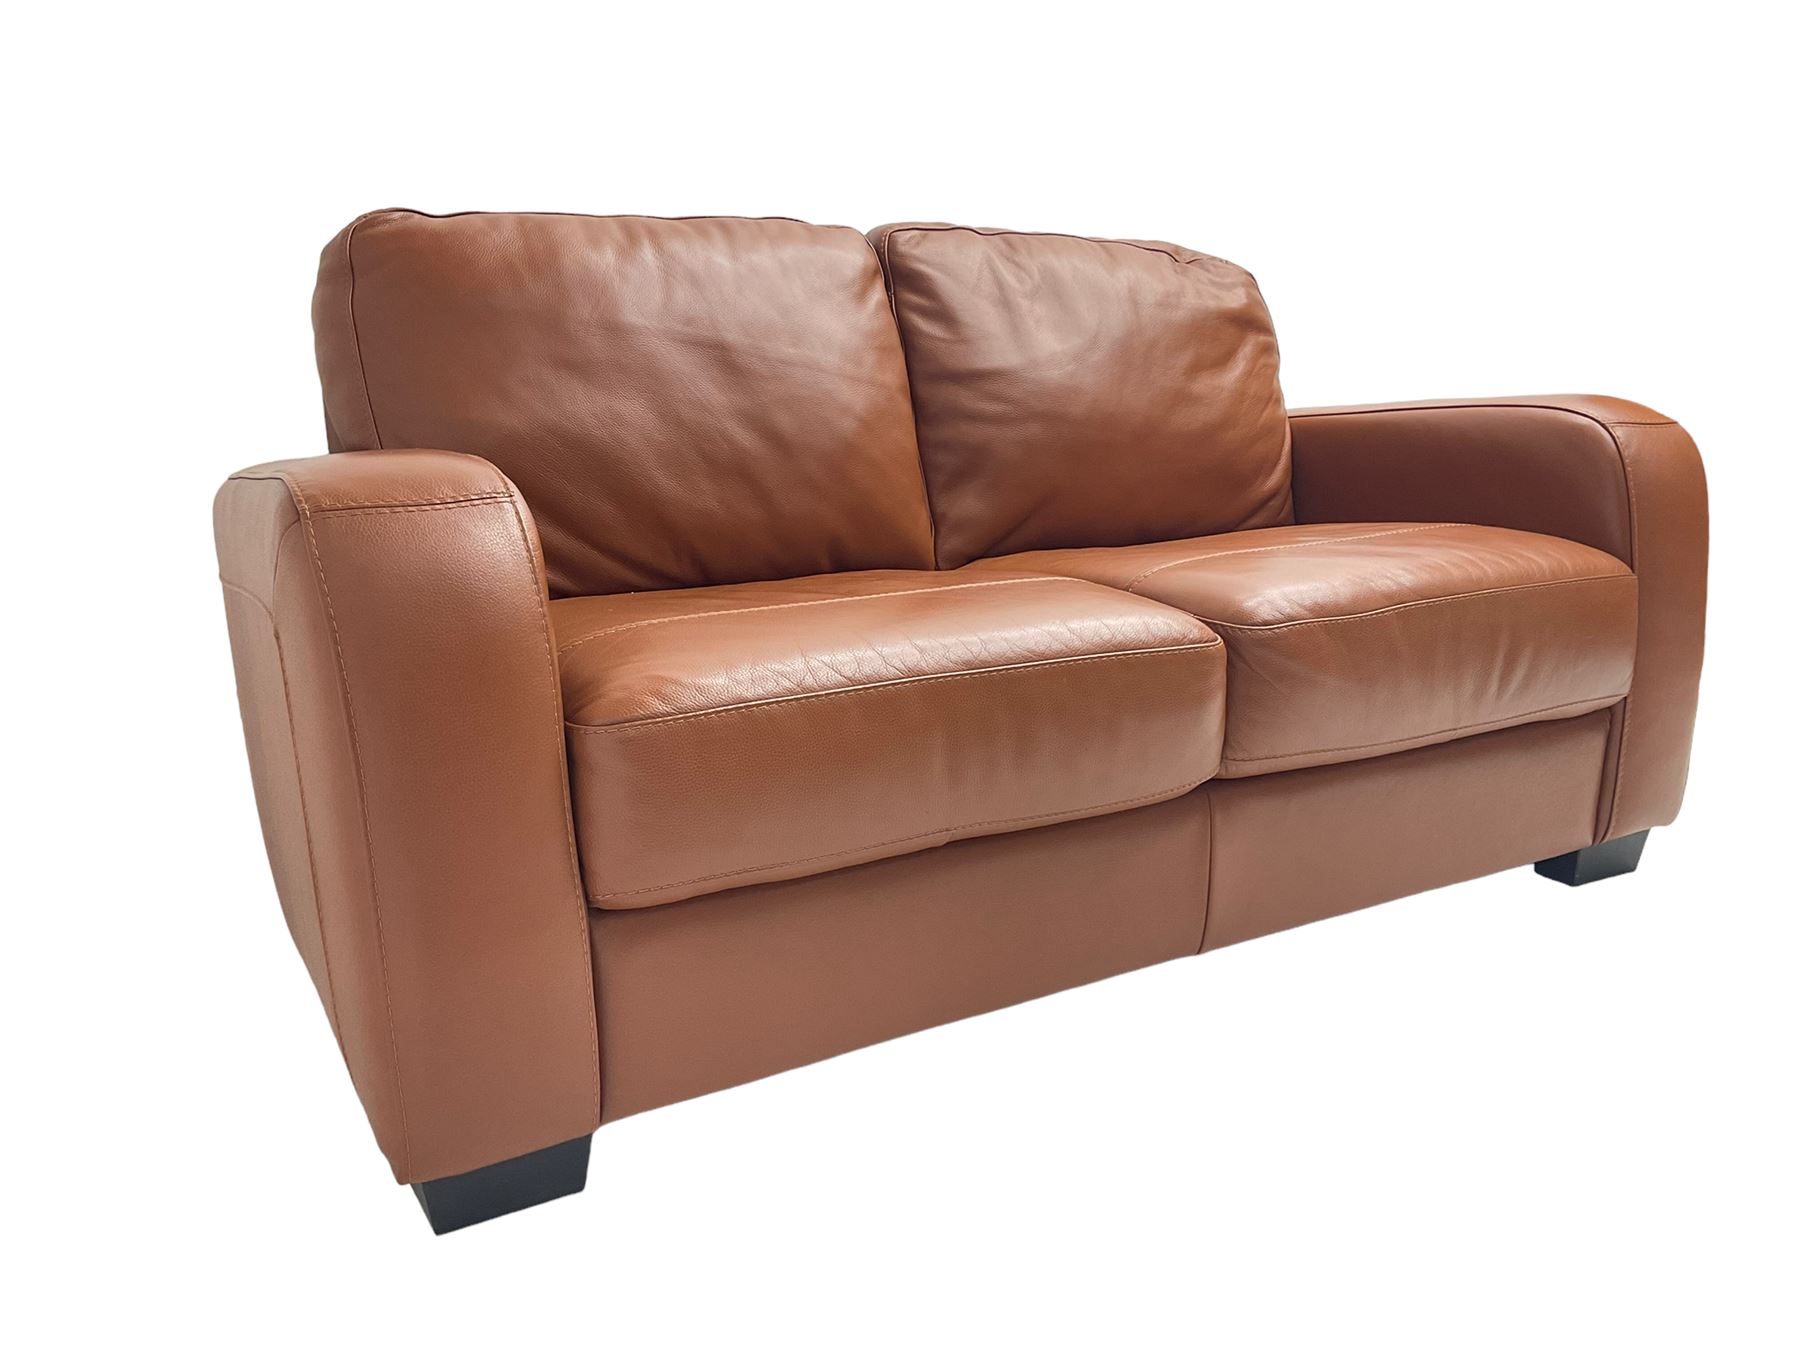 Two seat sofa - Image 5 of 6